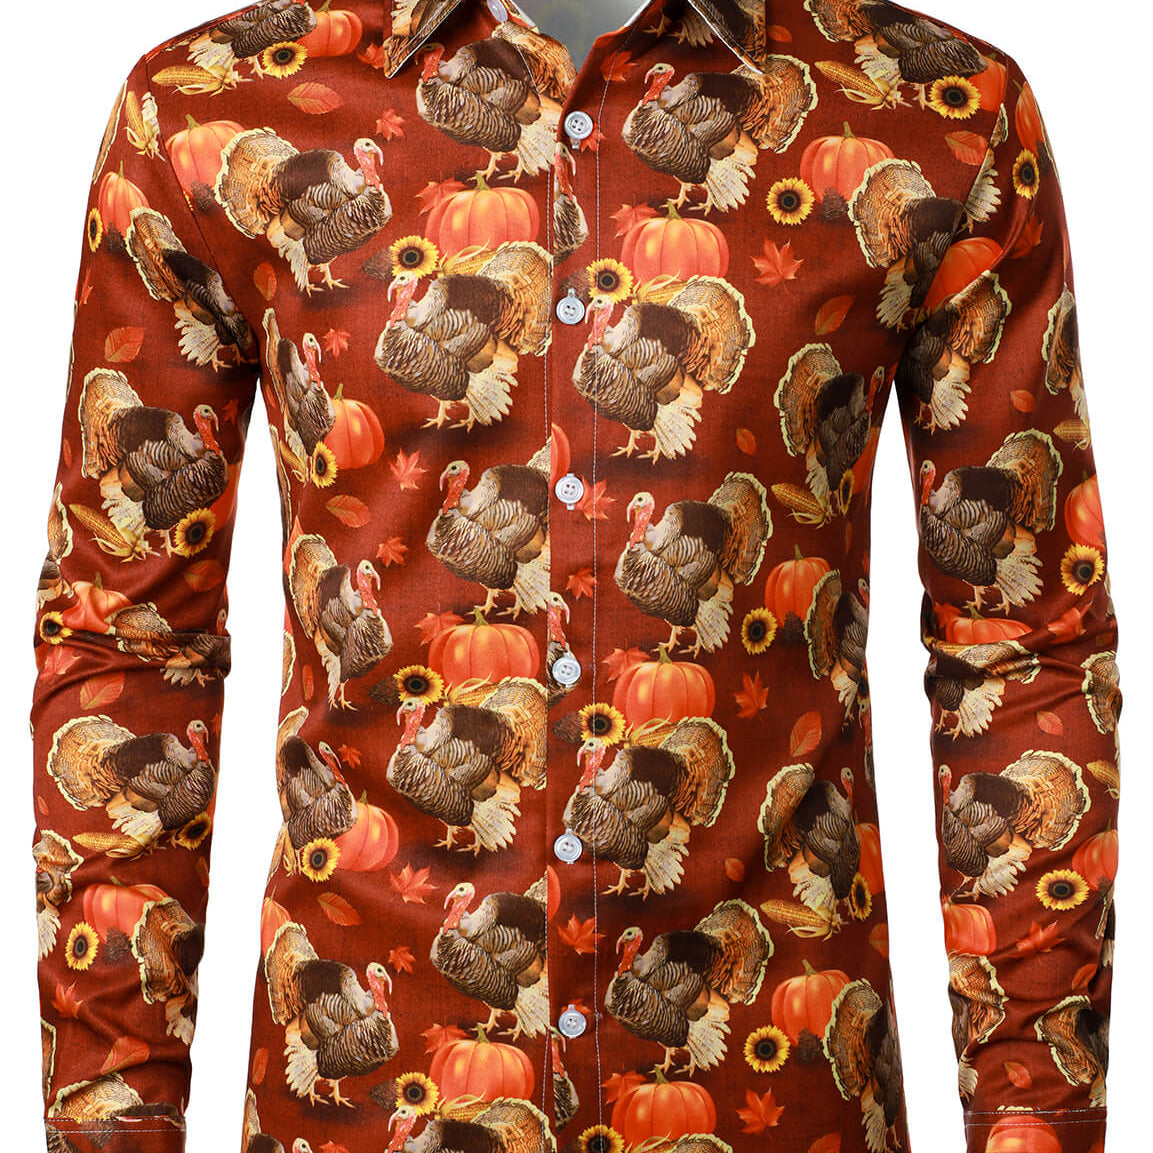 Men's Thanksgiving Gift Funny Turkey Holiday Button Long Sleeve Shirt